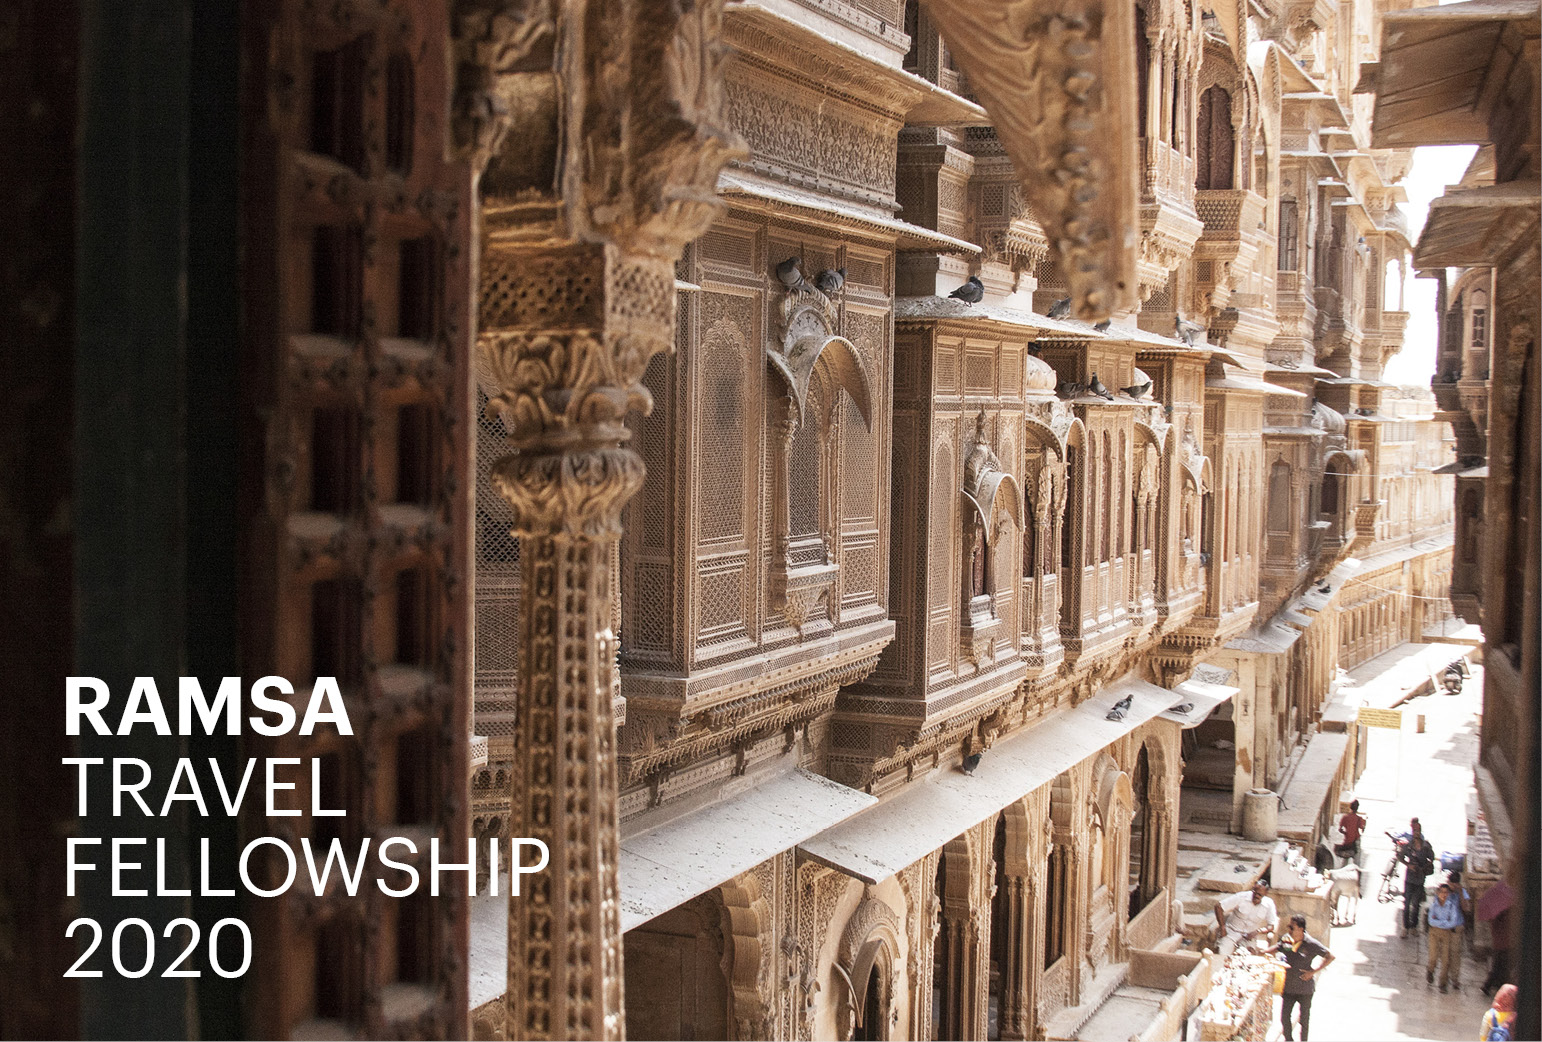 Robert A.M. Stern Architects 2020 RAMSA Travel Fellowship Call for Proposals Announced